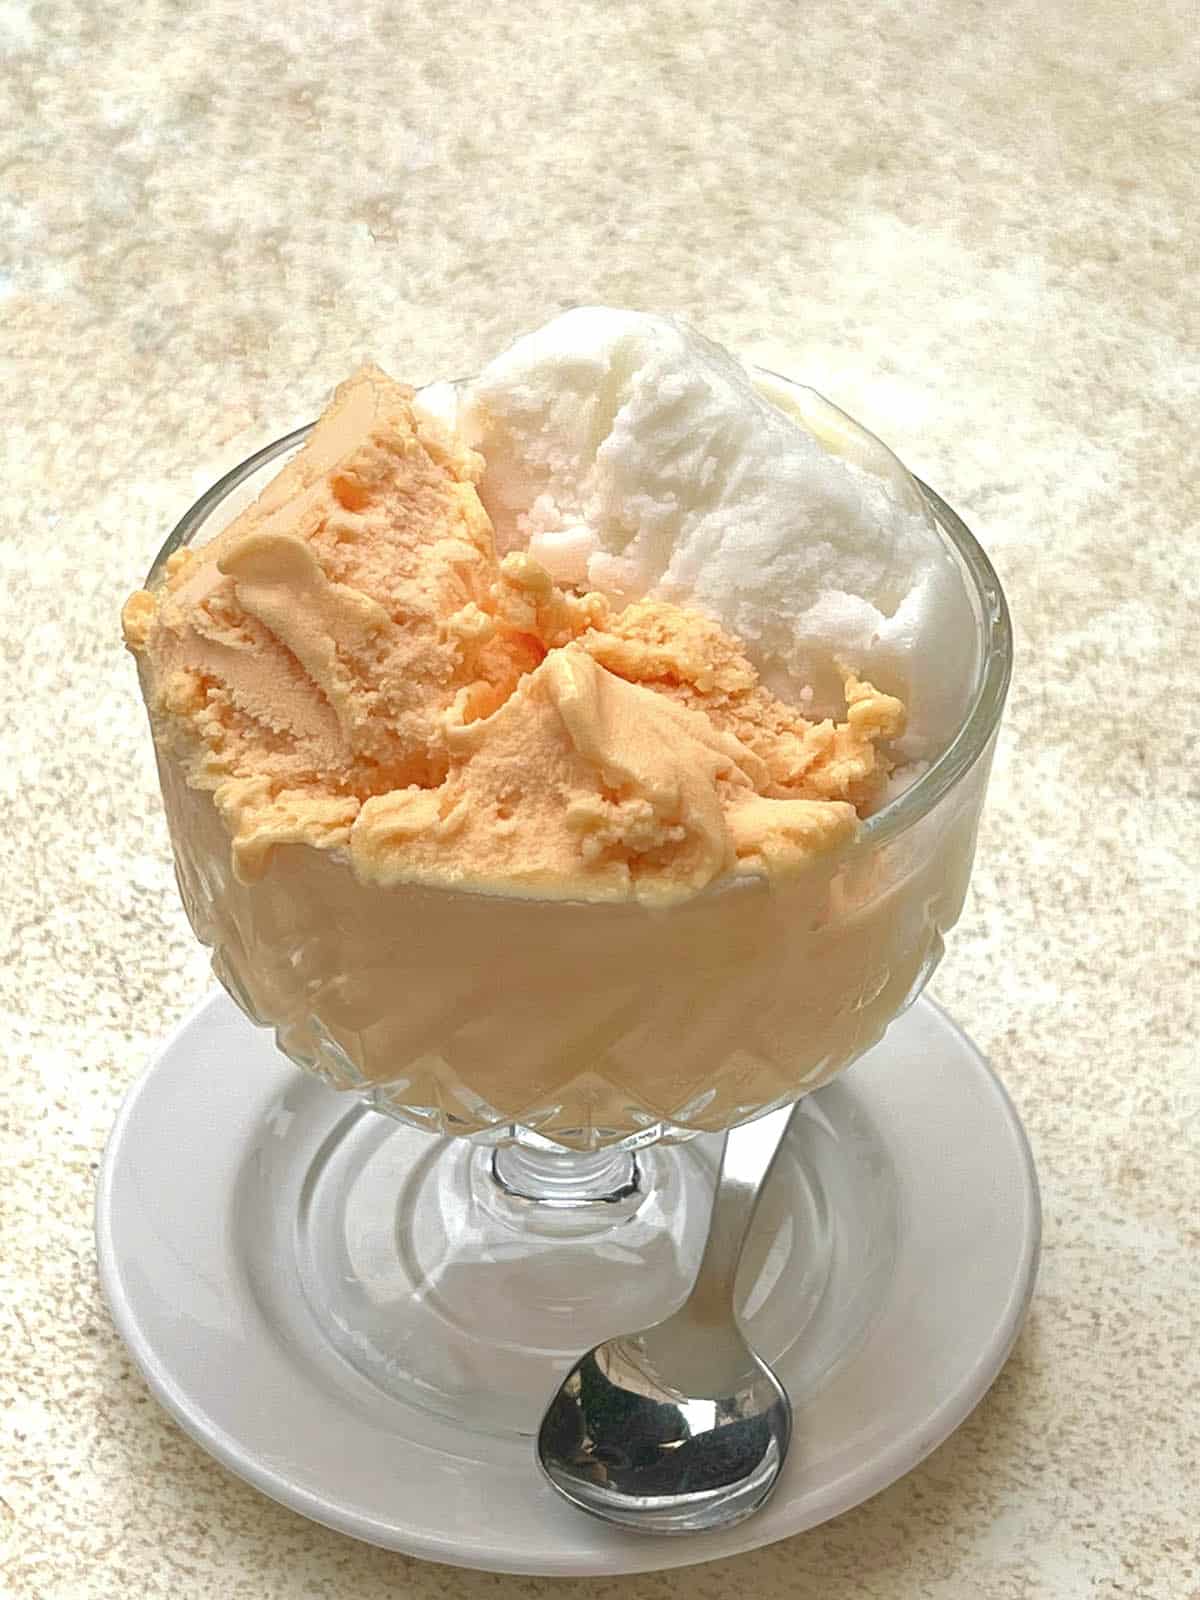 An image of a mandarin and lemon gelato from Caffè Costanzo in Noto, Sicily